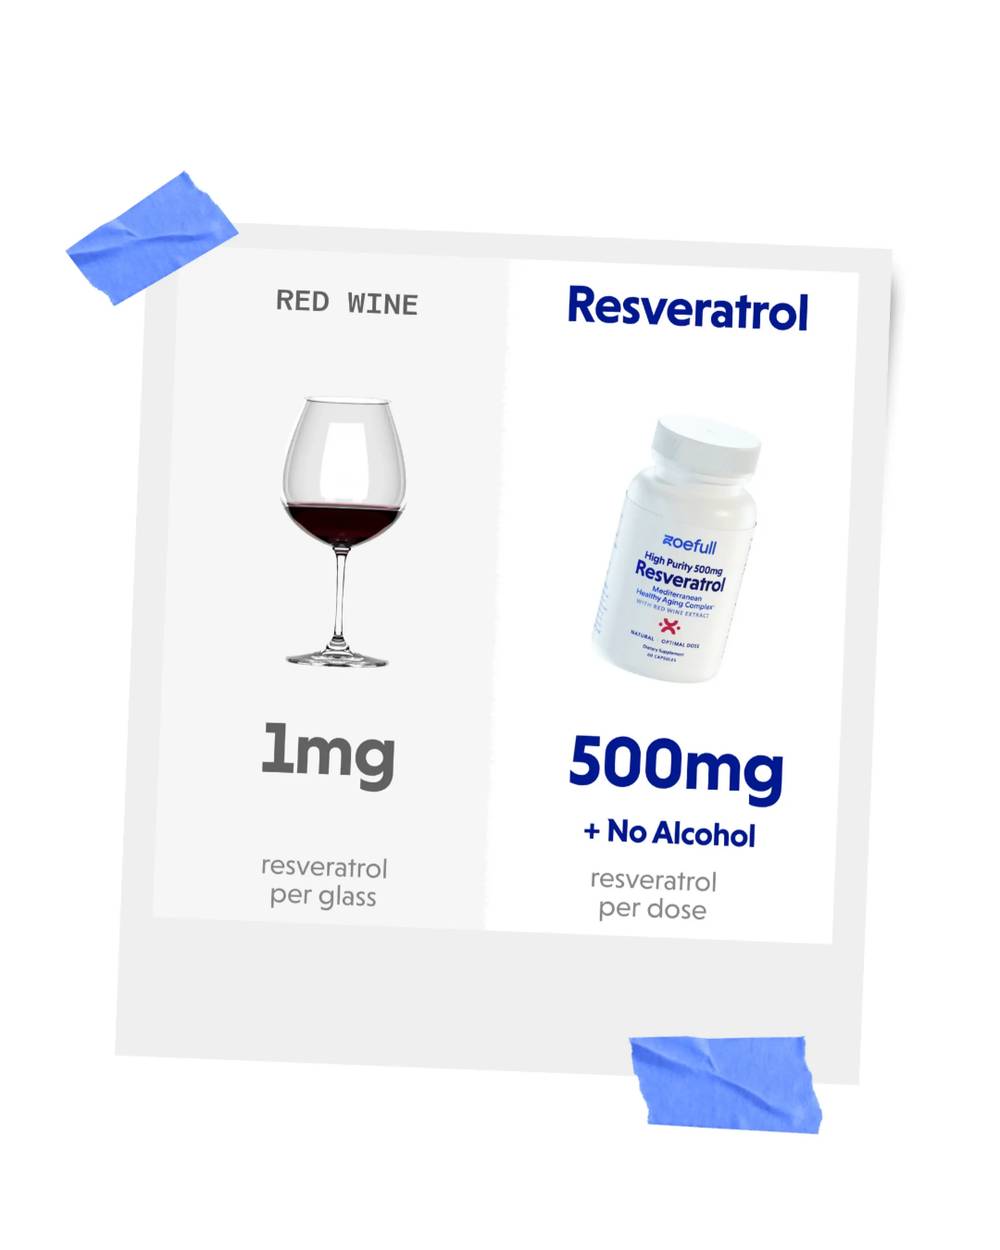 Comparison image comparing a dose of zoefull's resveratrol capsule supplement with a glass of red wine that also contains resveratrol. With zoefull you get 500mg and with a glass of read wine 1mg.